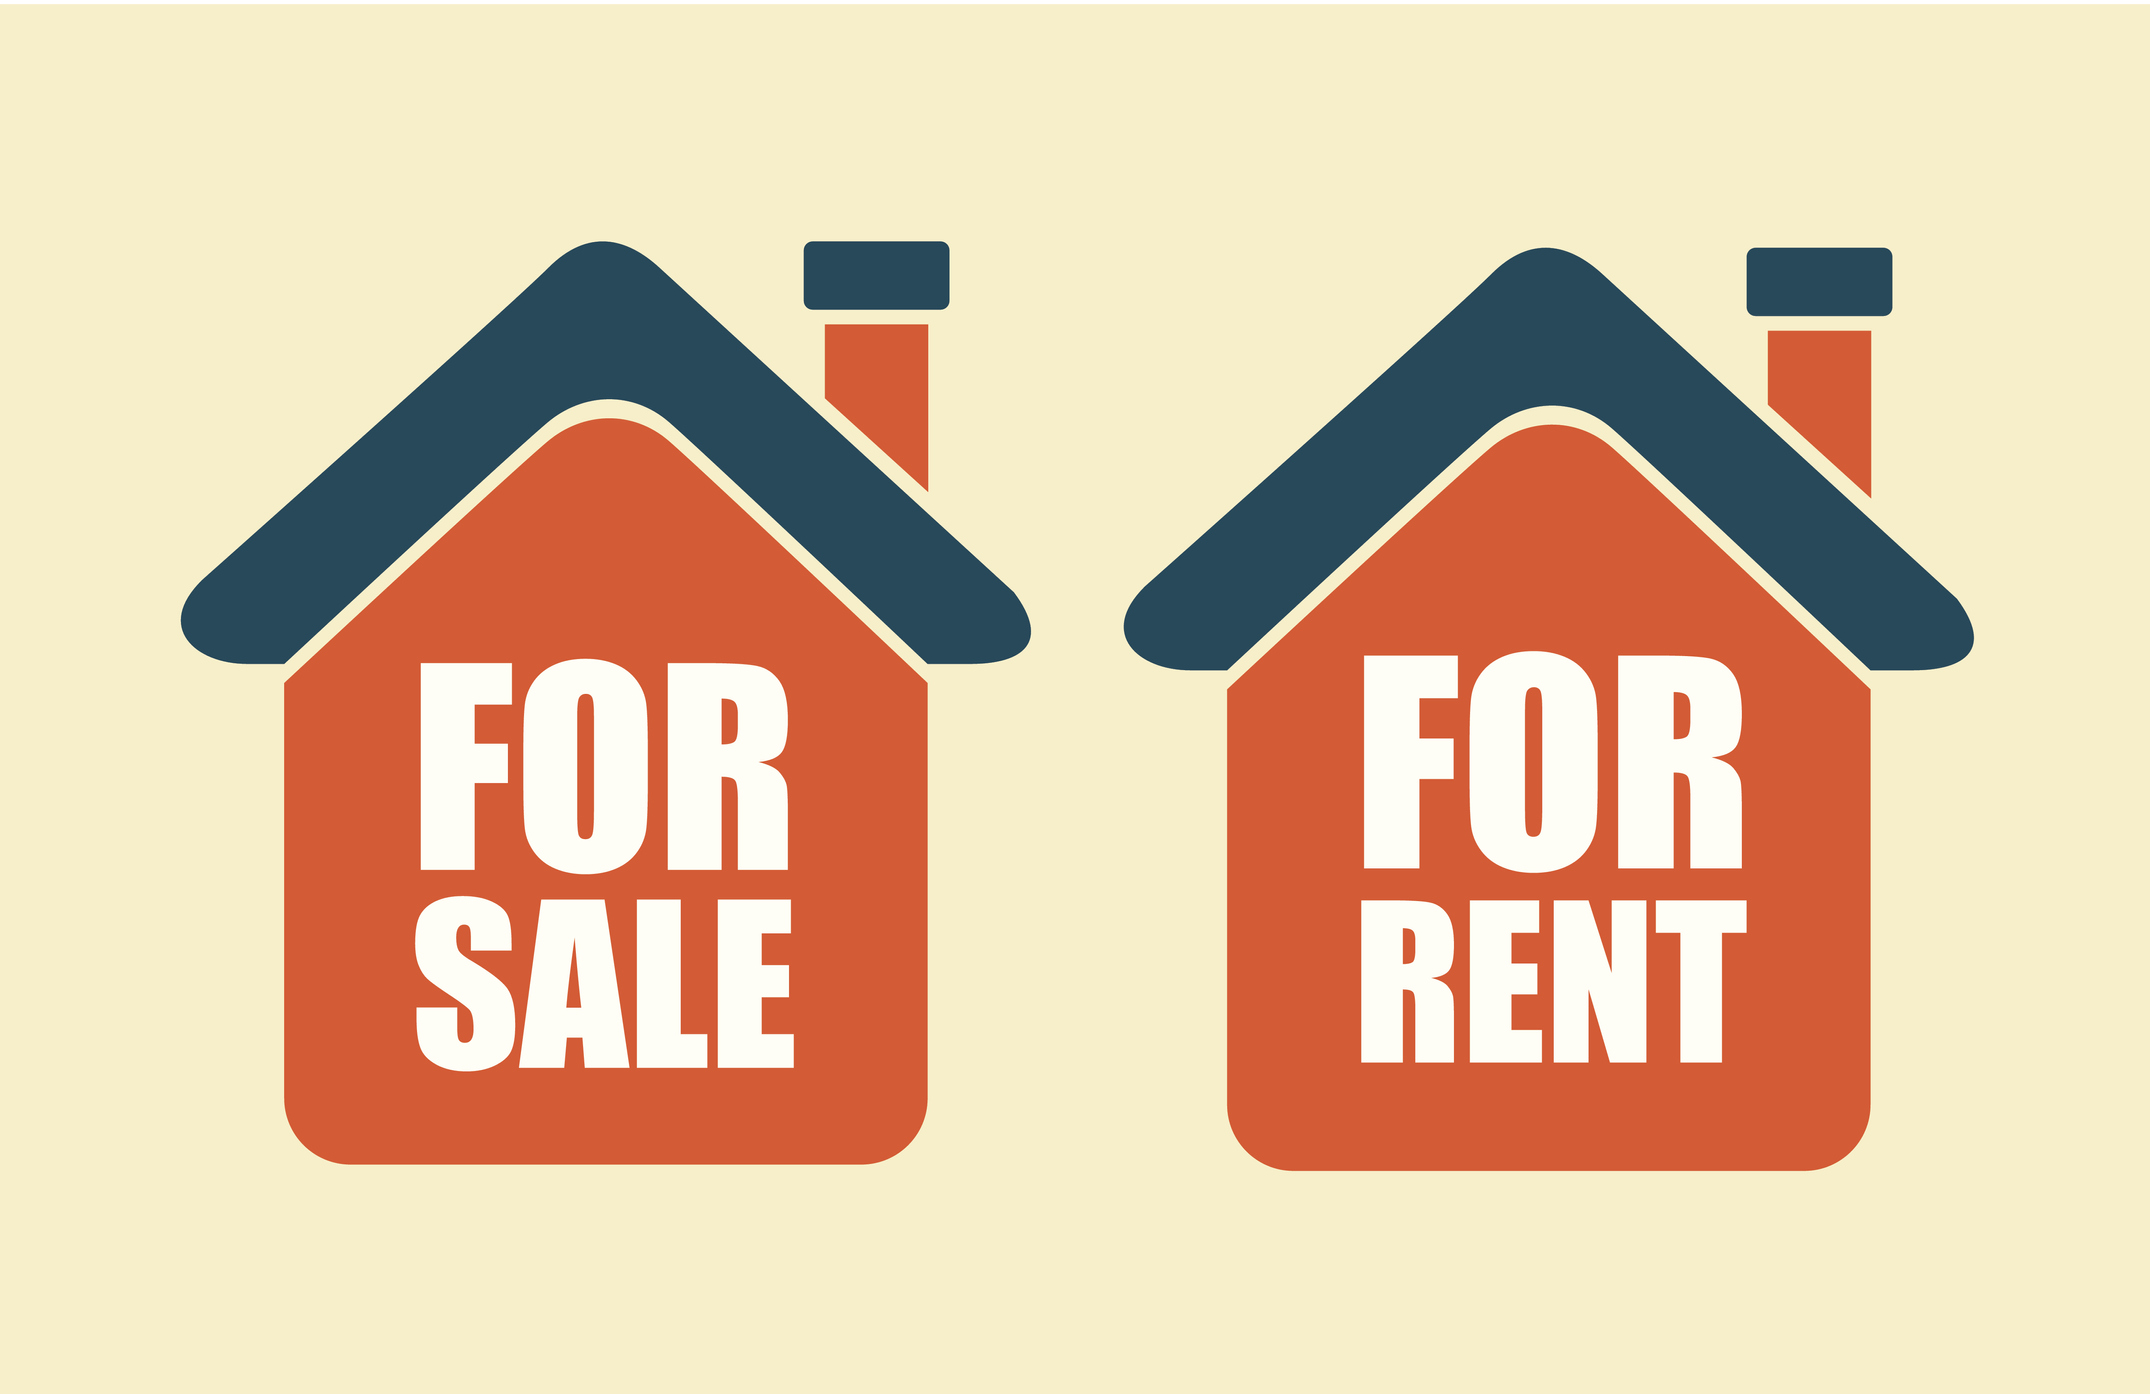 Buying vs. Renting: What's Best for You?